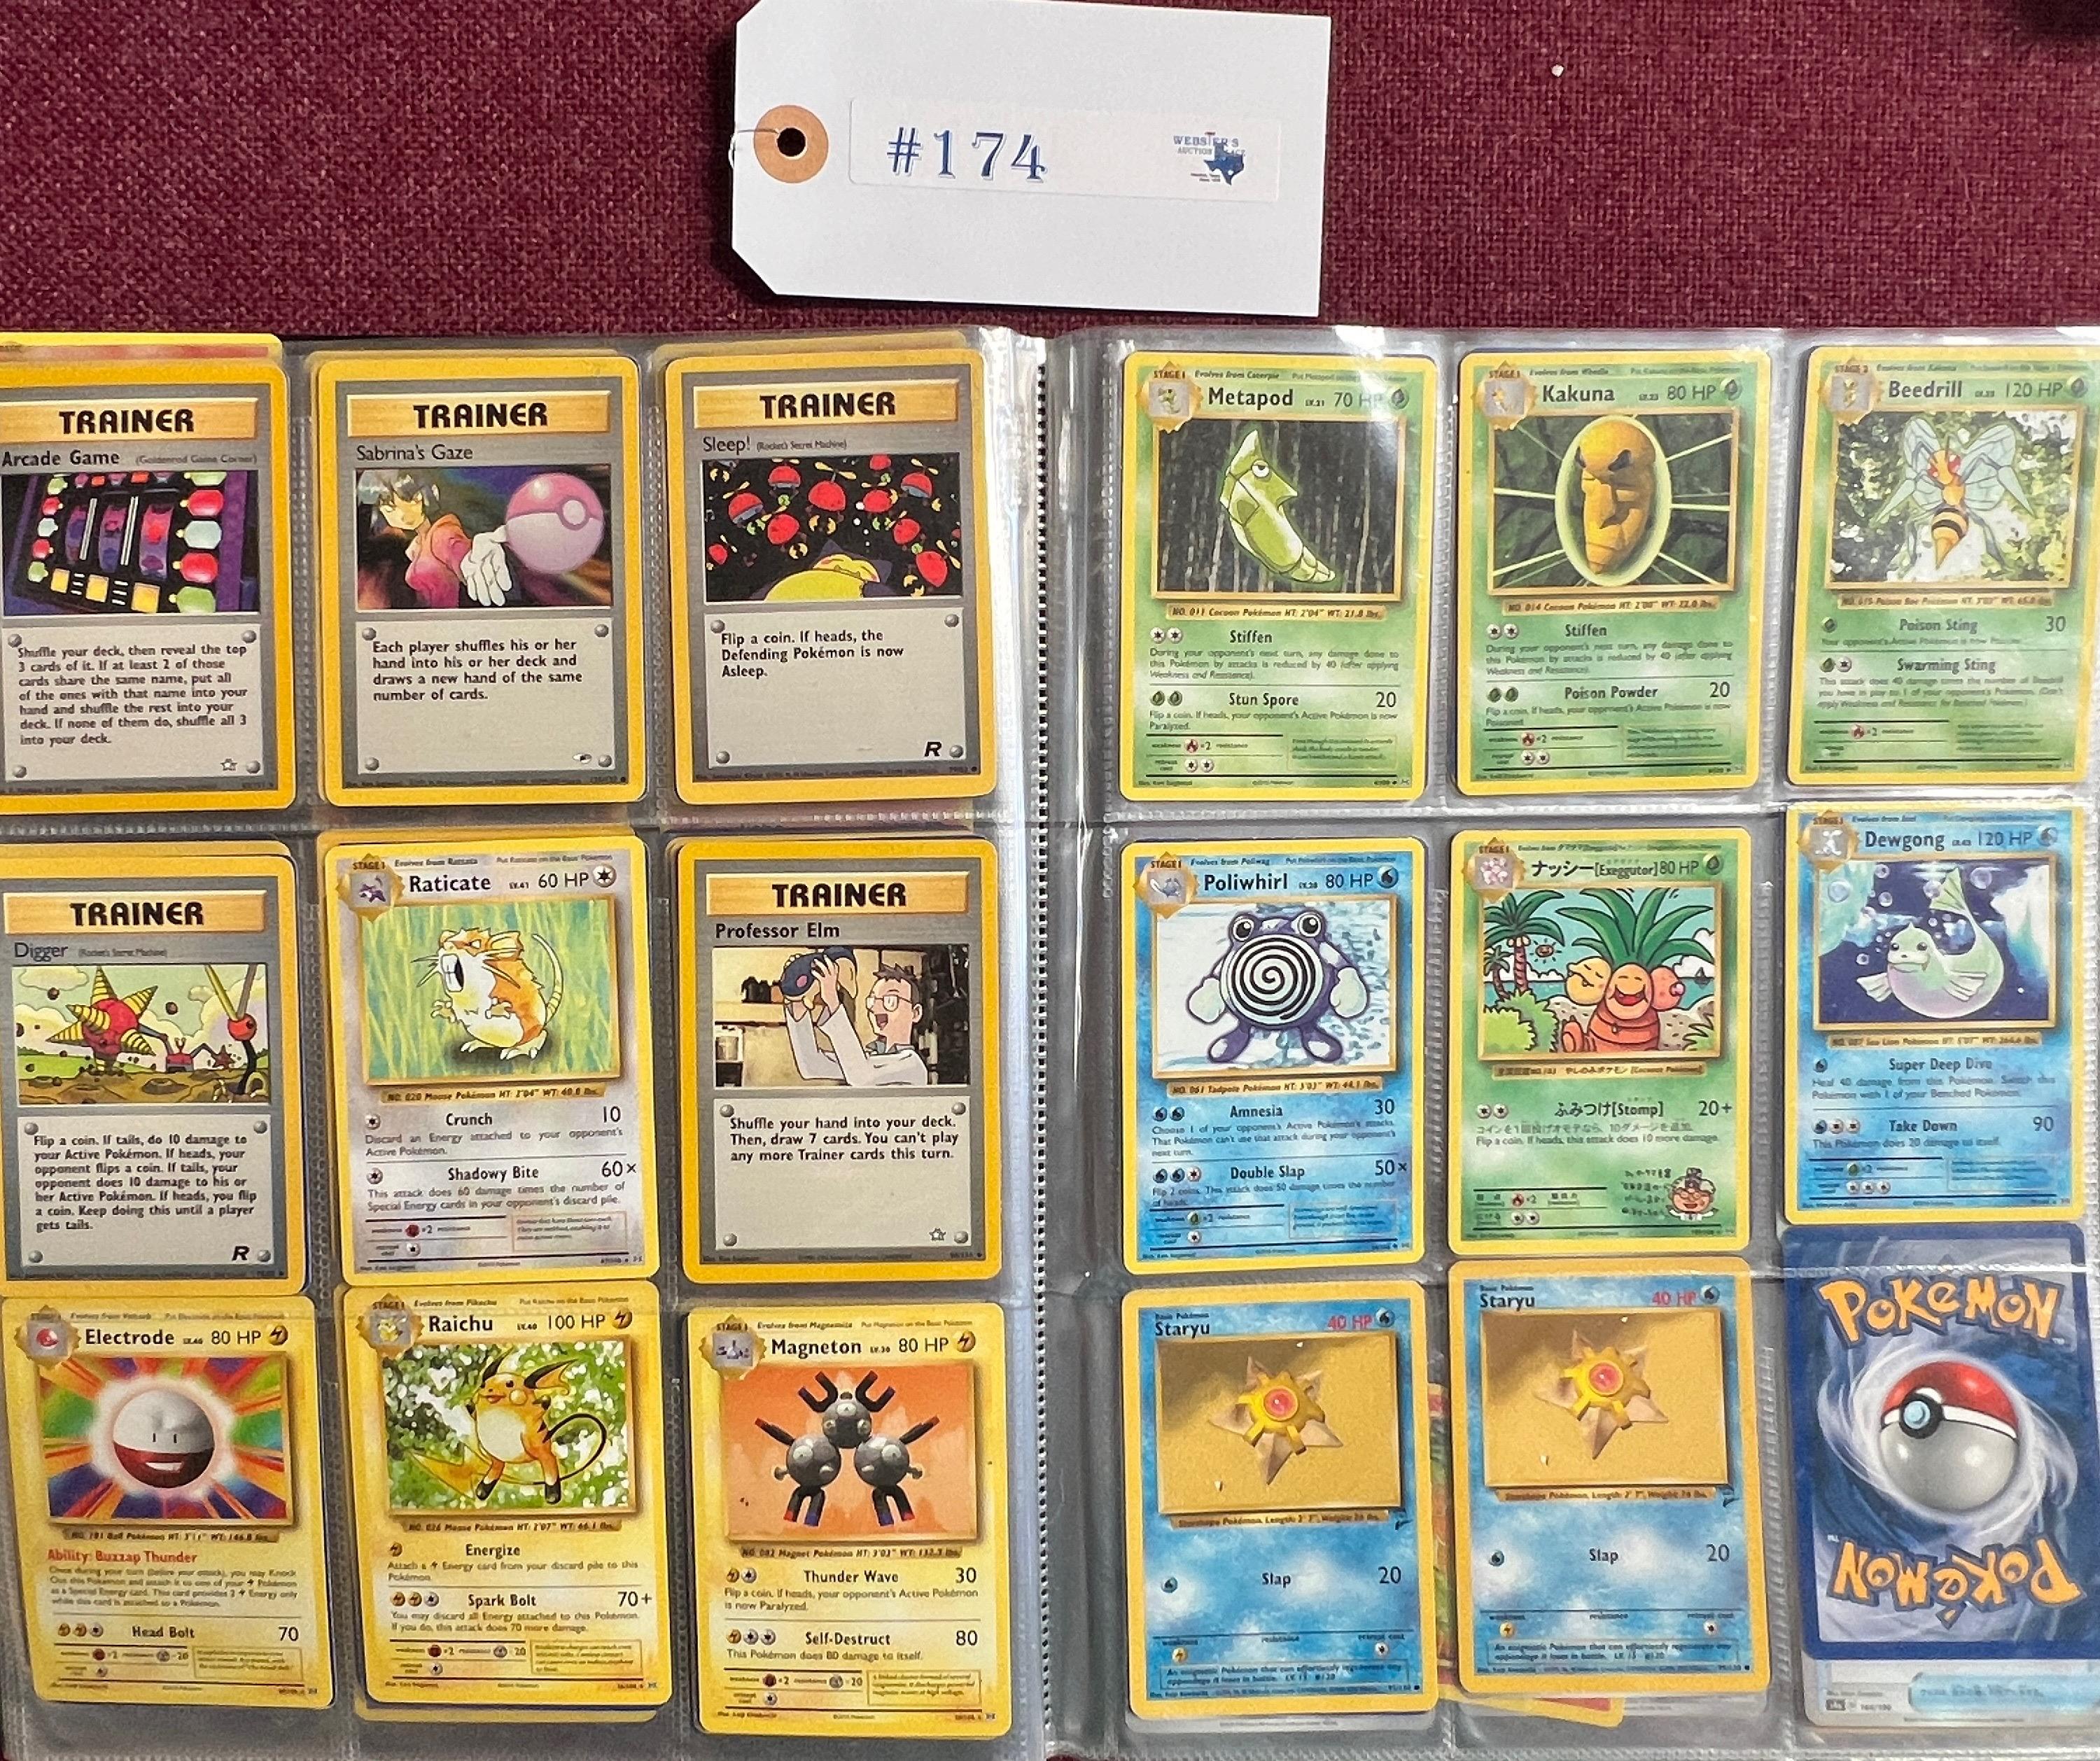 LARGE LOT OF POKEMON, MARVEL, FORTNITE & SPORTS COLLECTOR CARDS